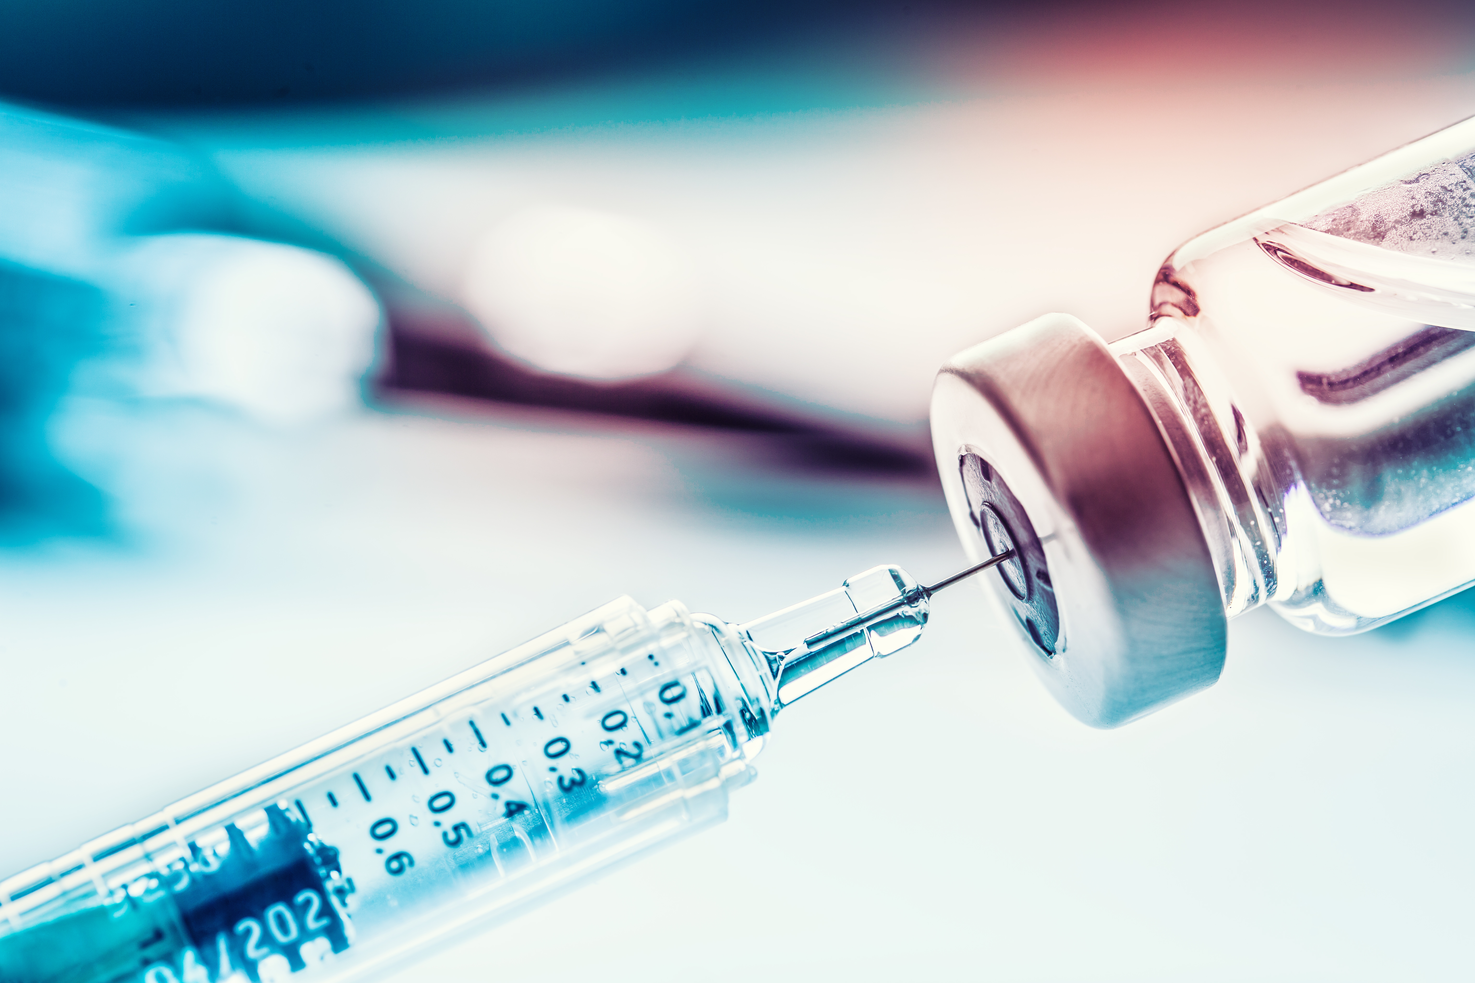 Study: Defiance, Low Trust in Medical Doctors Related to Vaccine Skepticism